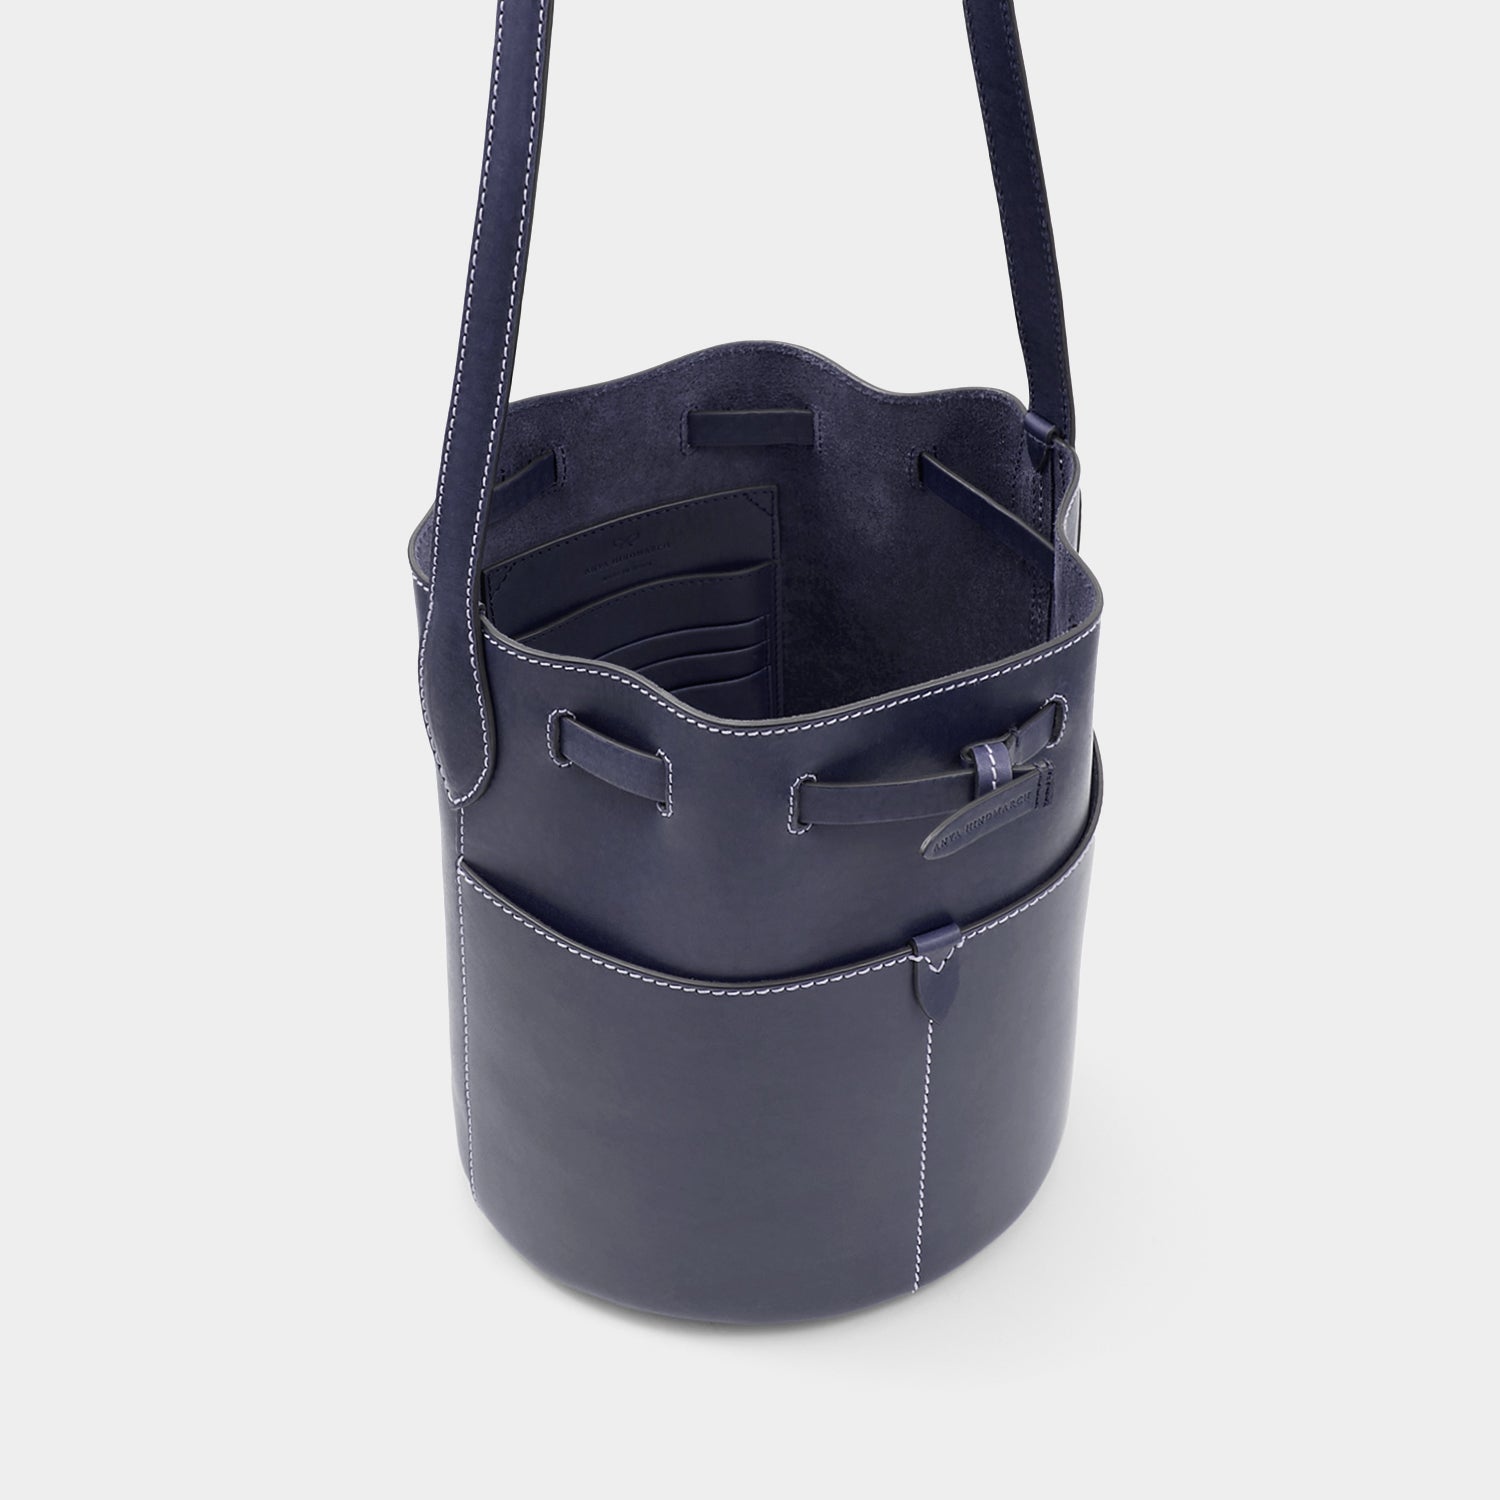 「Return to Nature」バケットバッグ スモール -

                  
                    Compostable Leather in Marine -
                  

                  Anya Hindmarch JP
